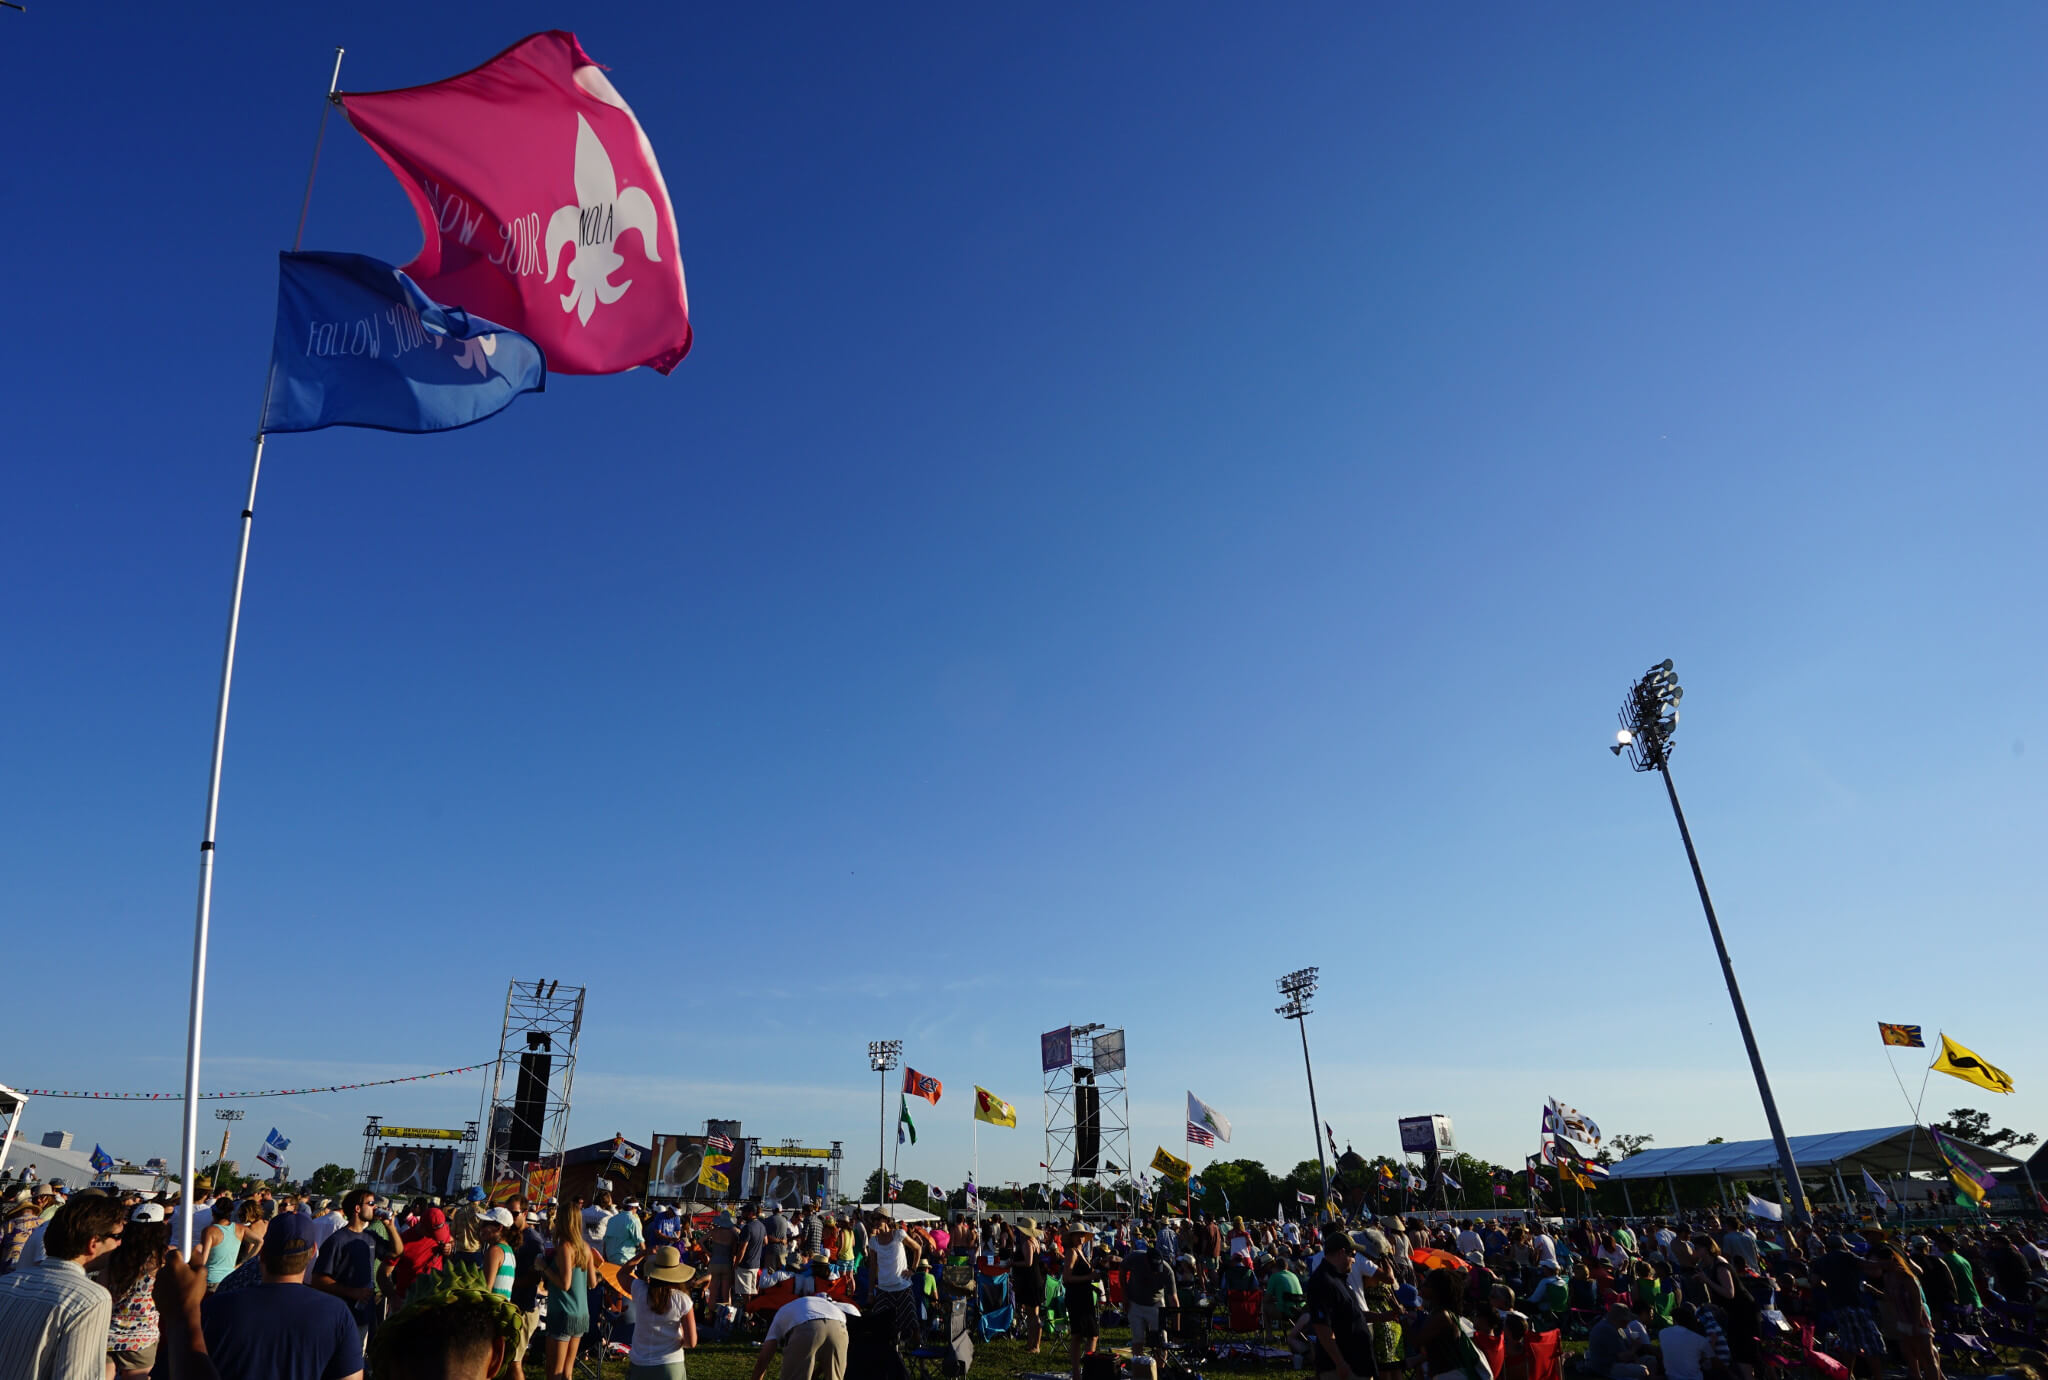 Jazz Fest is one of many festivals that impacts our economy. (Photo: Paul Broussard)